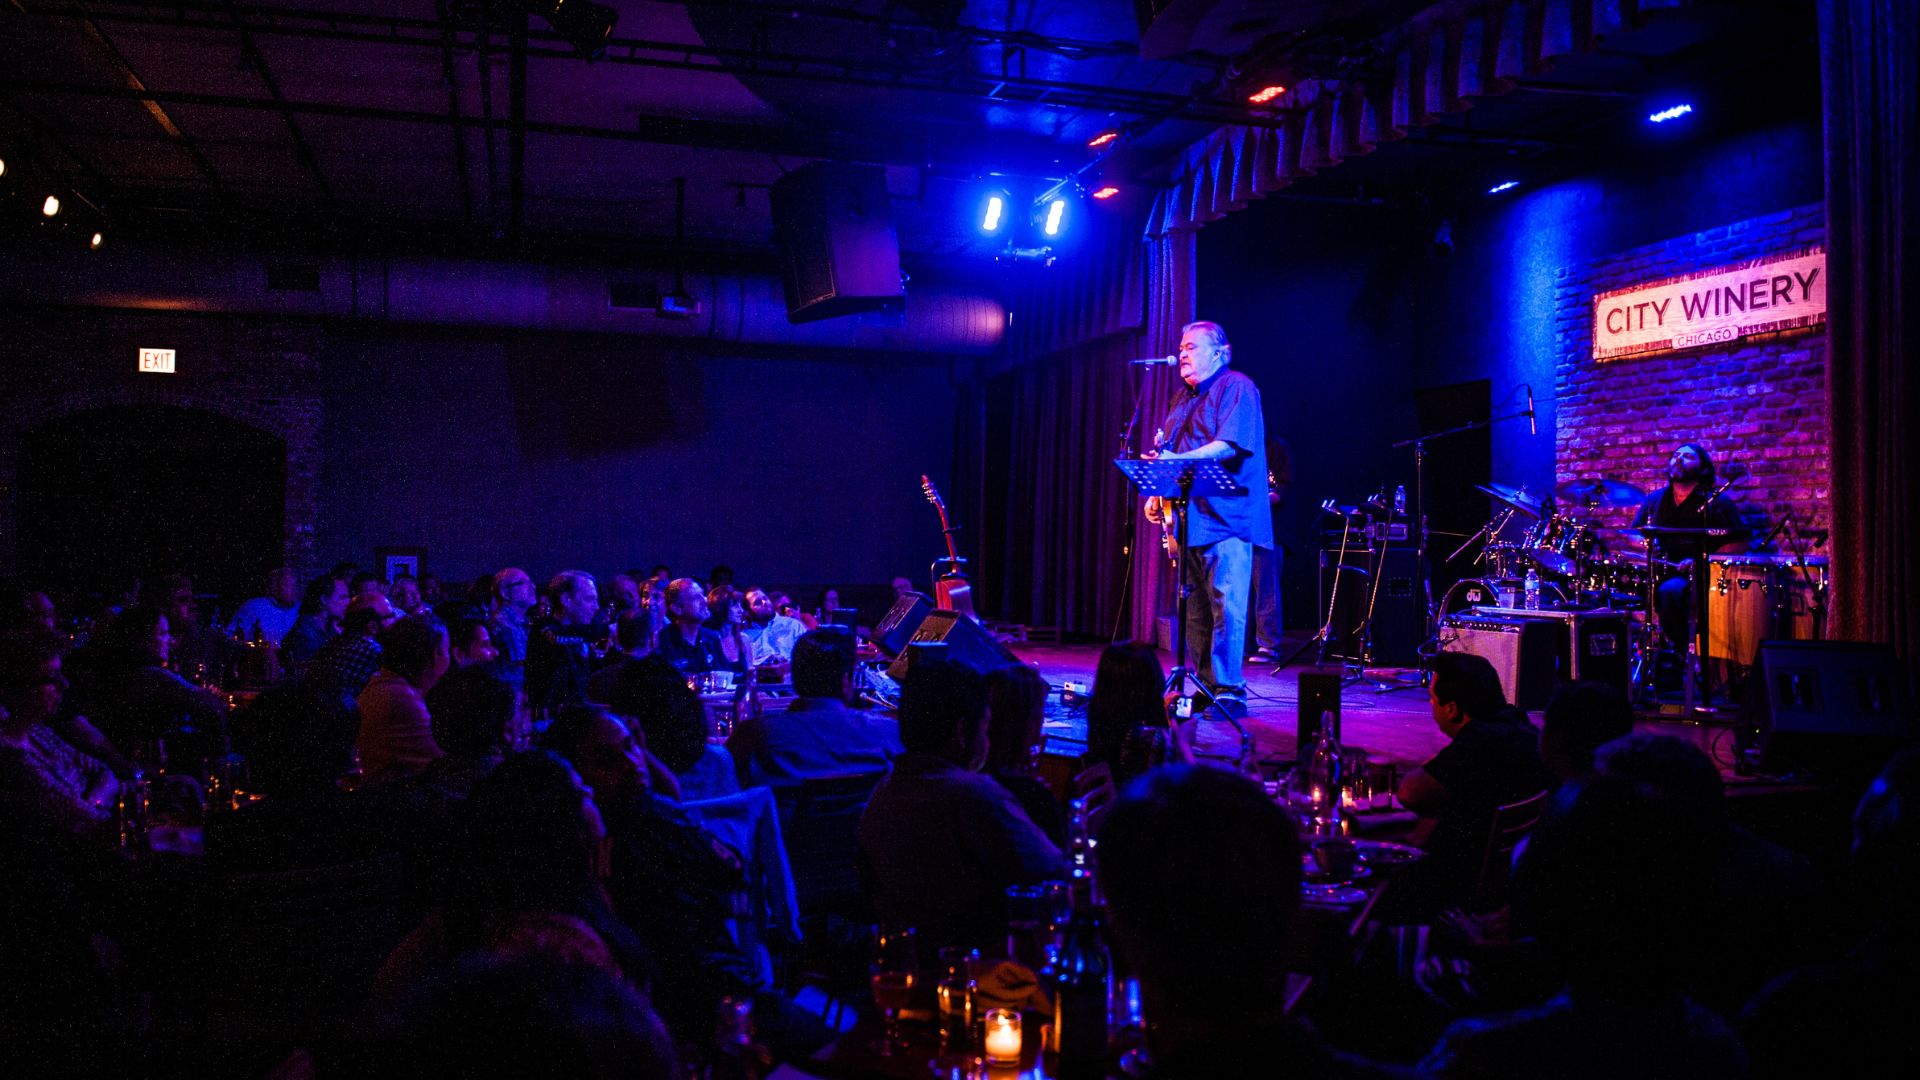 City Winery offers approximately 200 live performances a year at its urban winery.